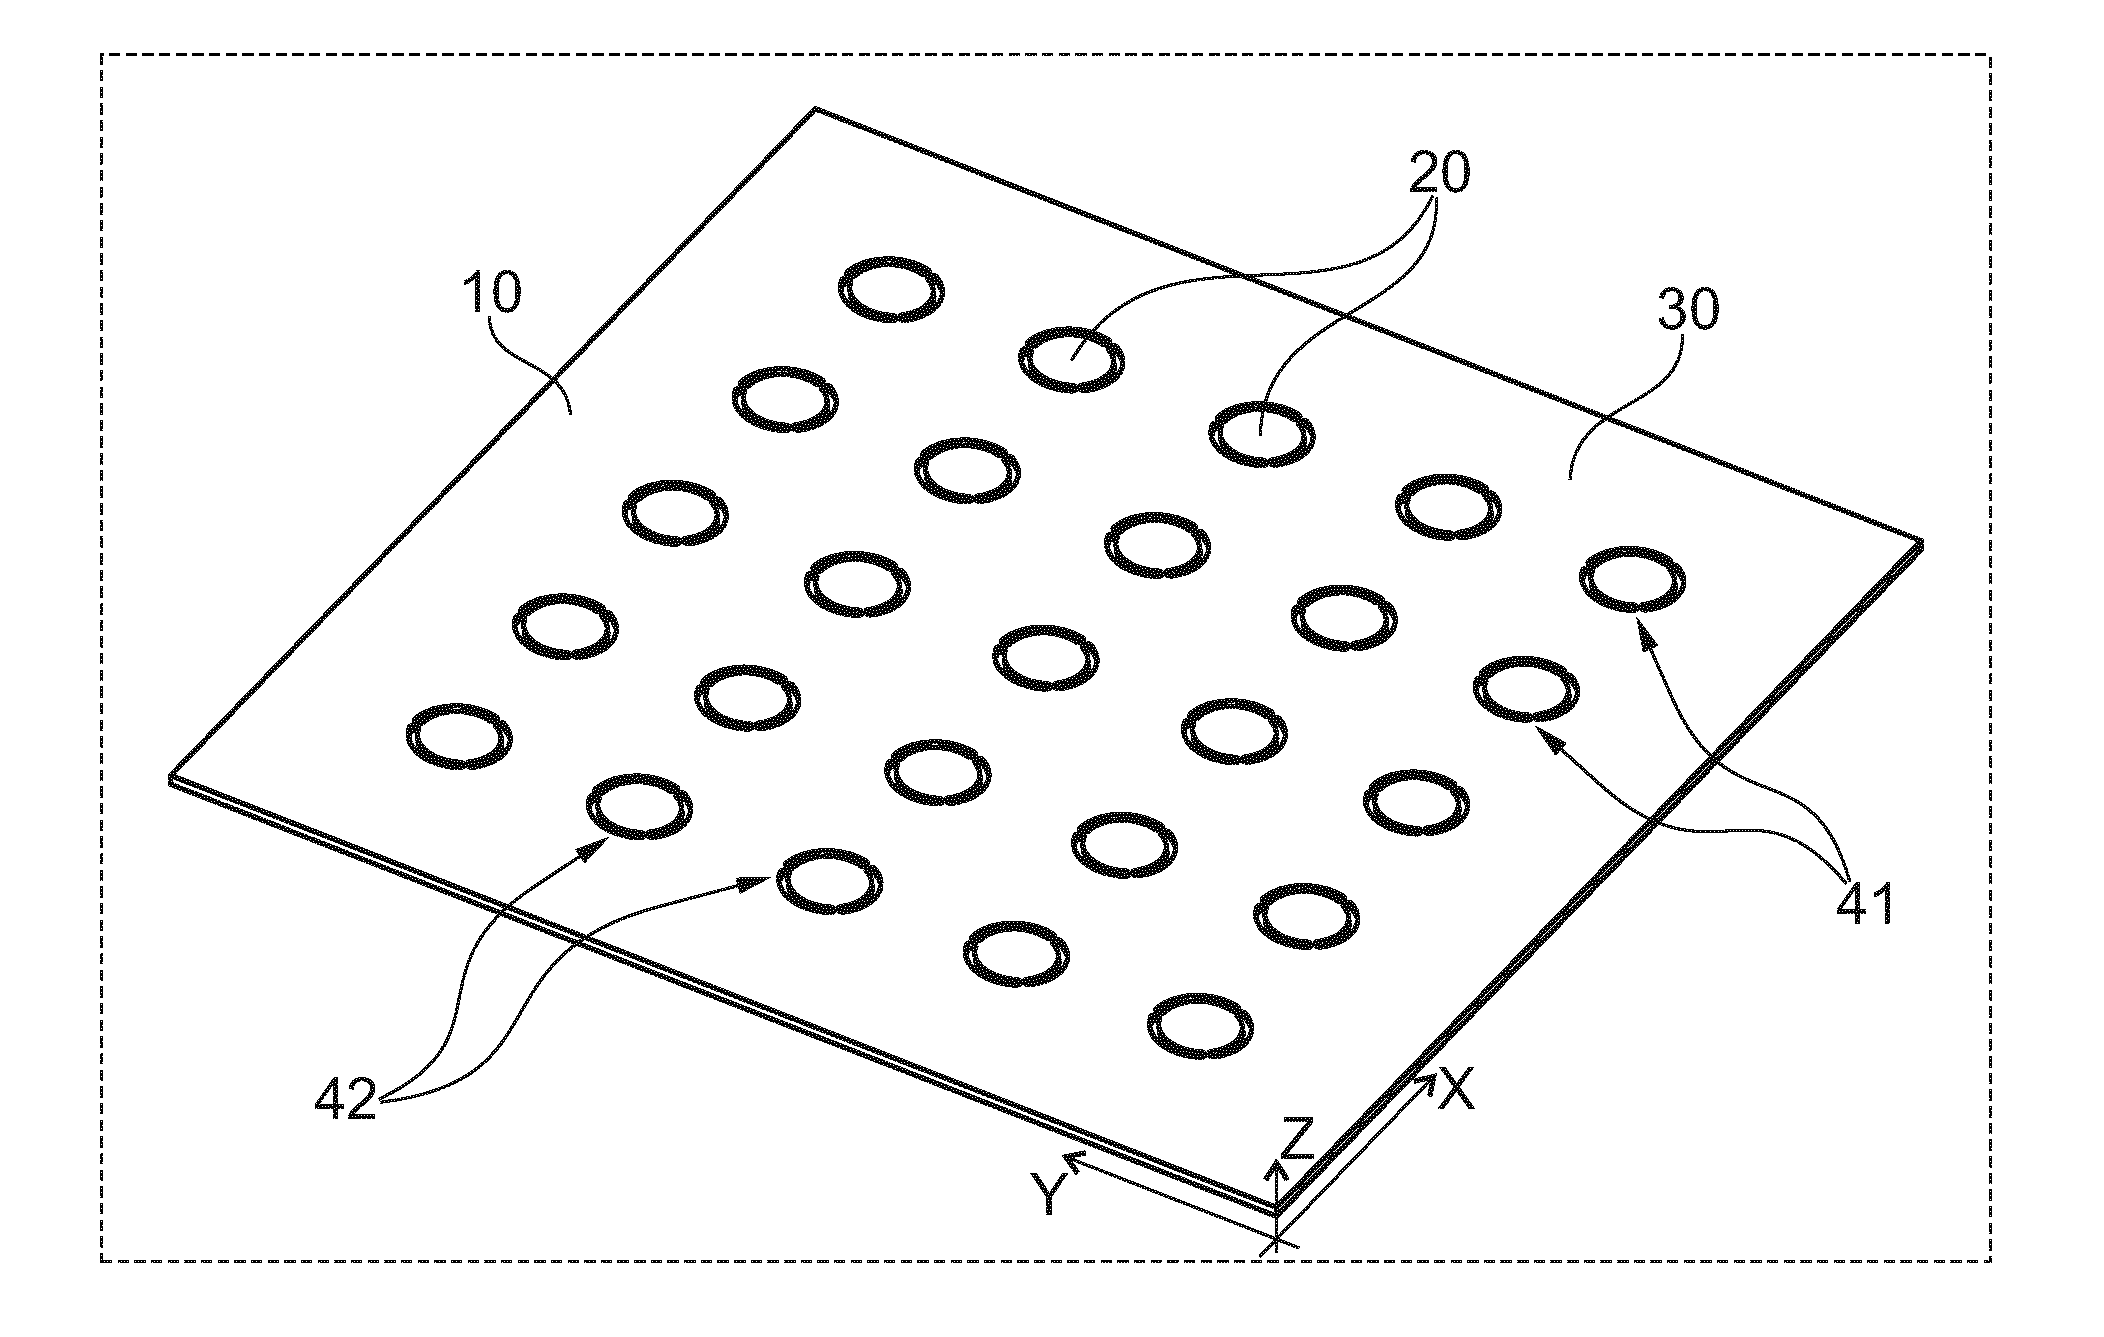 Integrated polymer foil, patch-clamp array and membrane valves